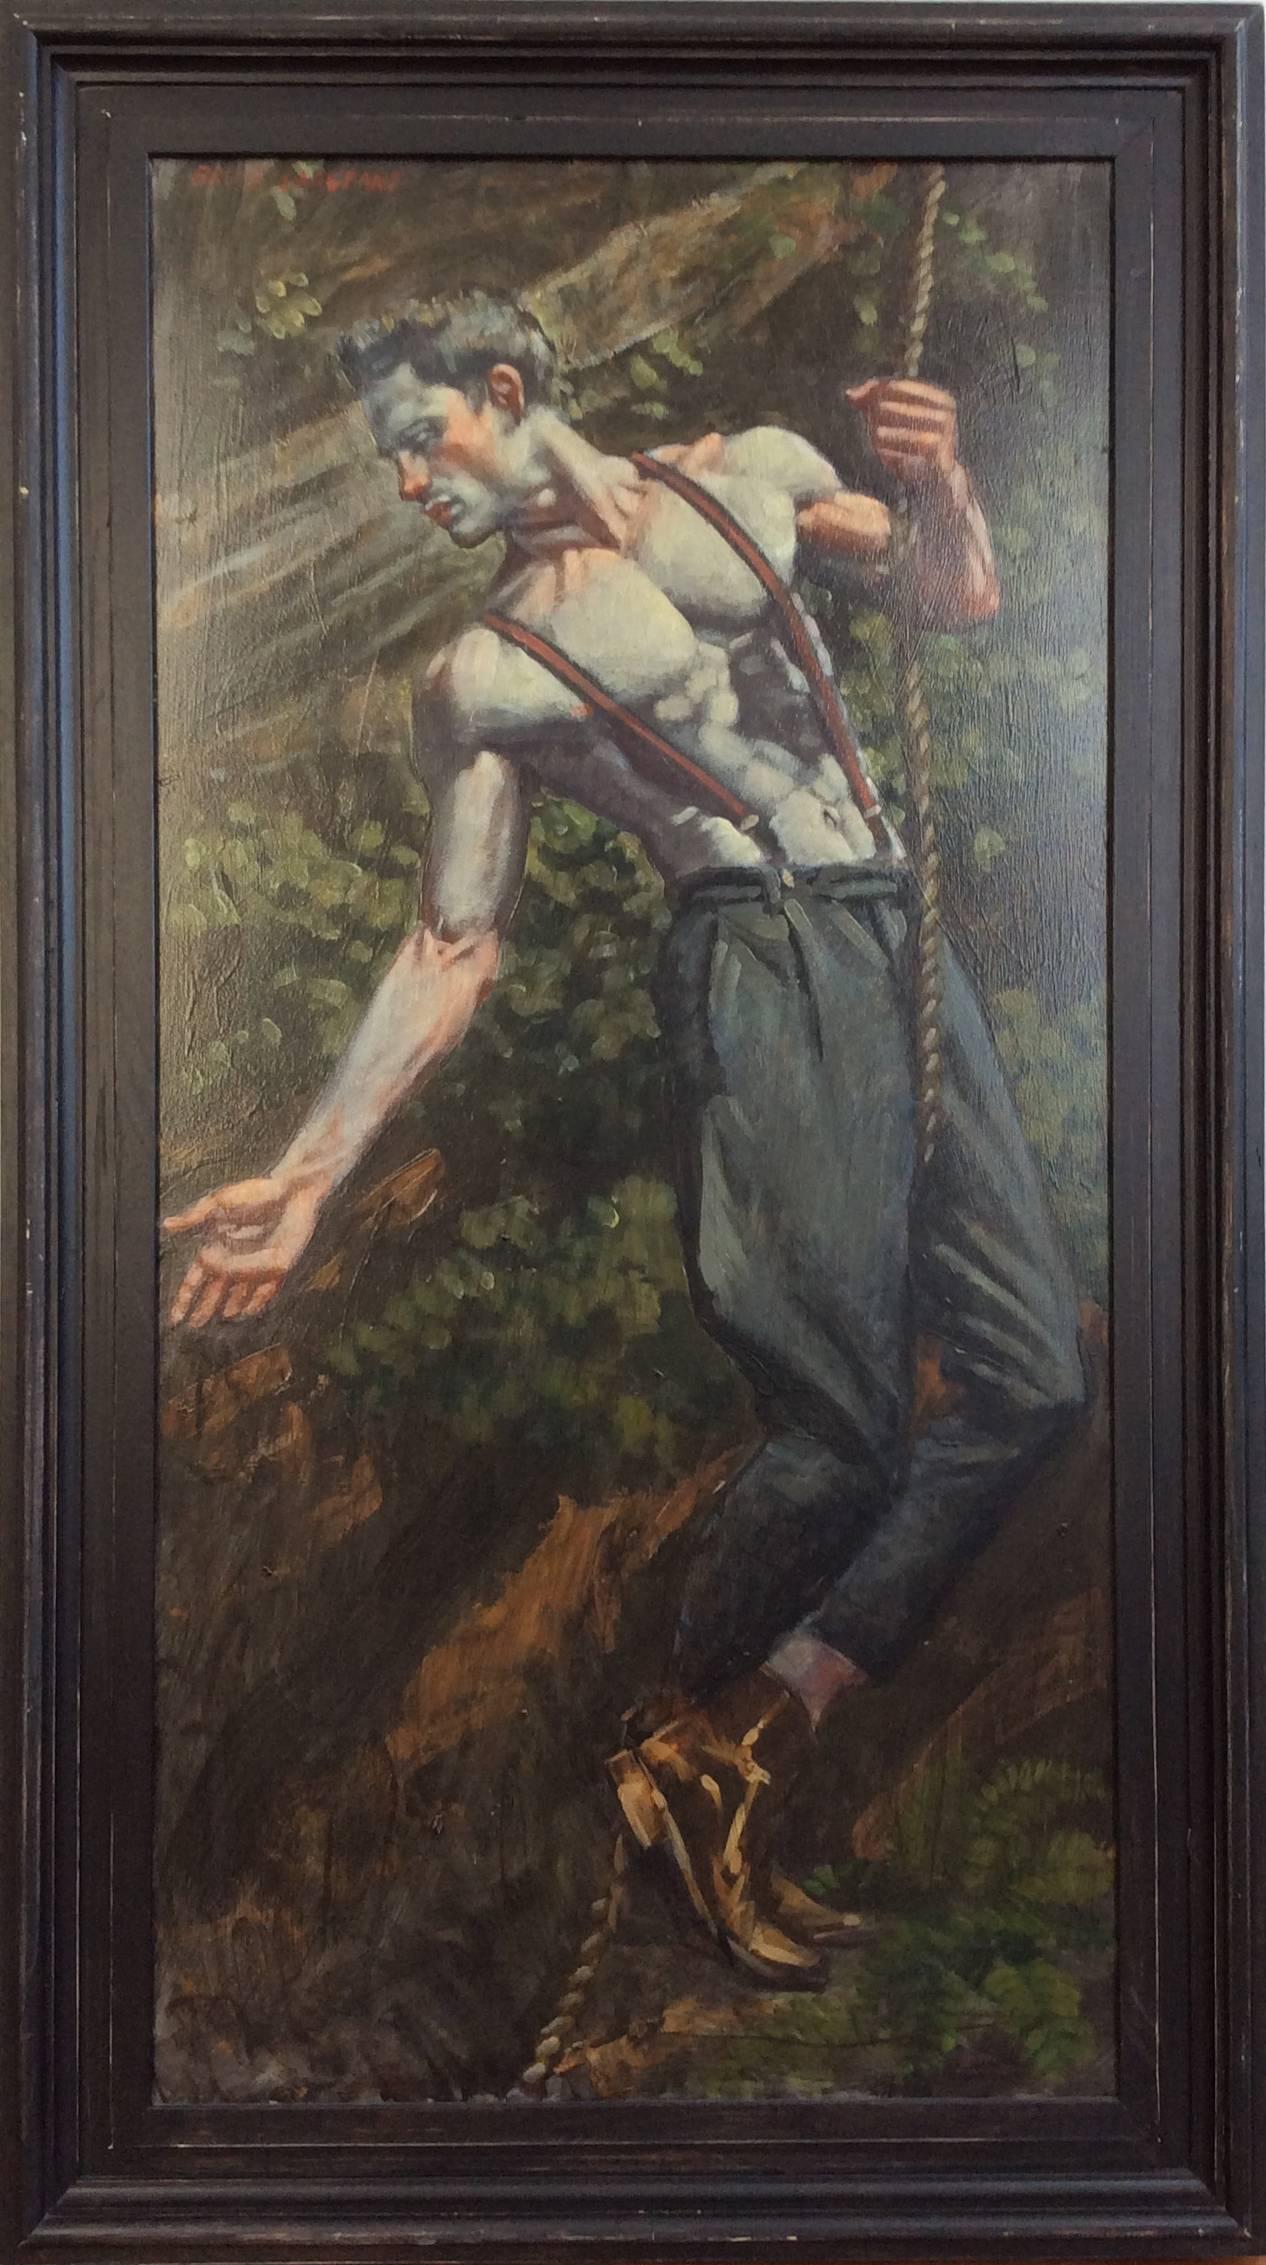 Mark Beard Figurative Painting - Climber (Portrait of a Male in Suspenders & Boots holding a rope in a Landscape)